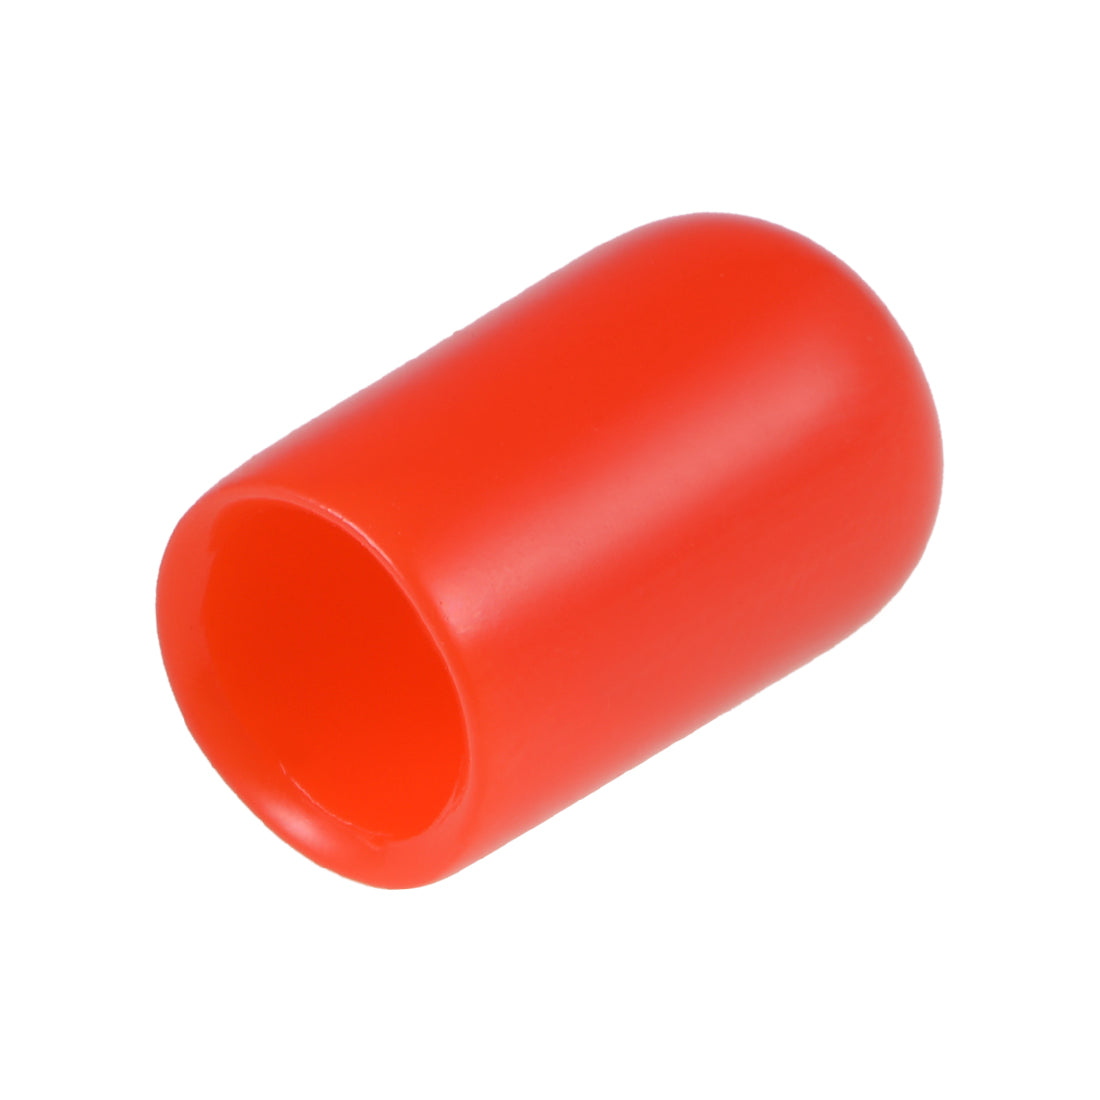 uxcell Uxcell 200pcs Rubber End Caps 7.5mm ID 15mm Height Screw Thread Protectors Red